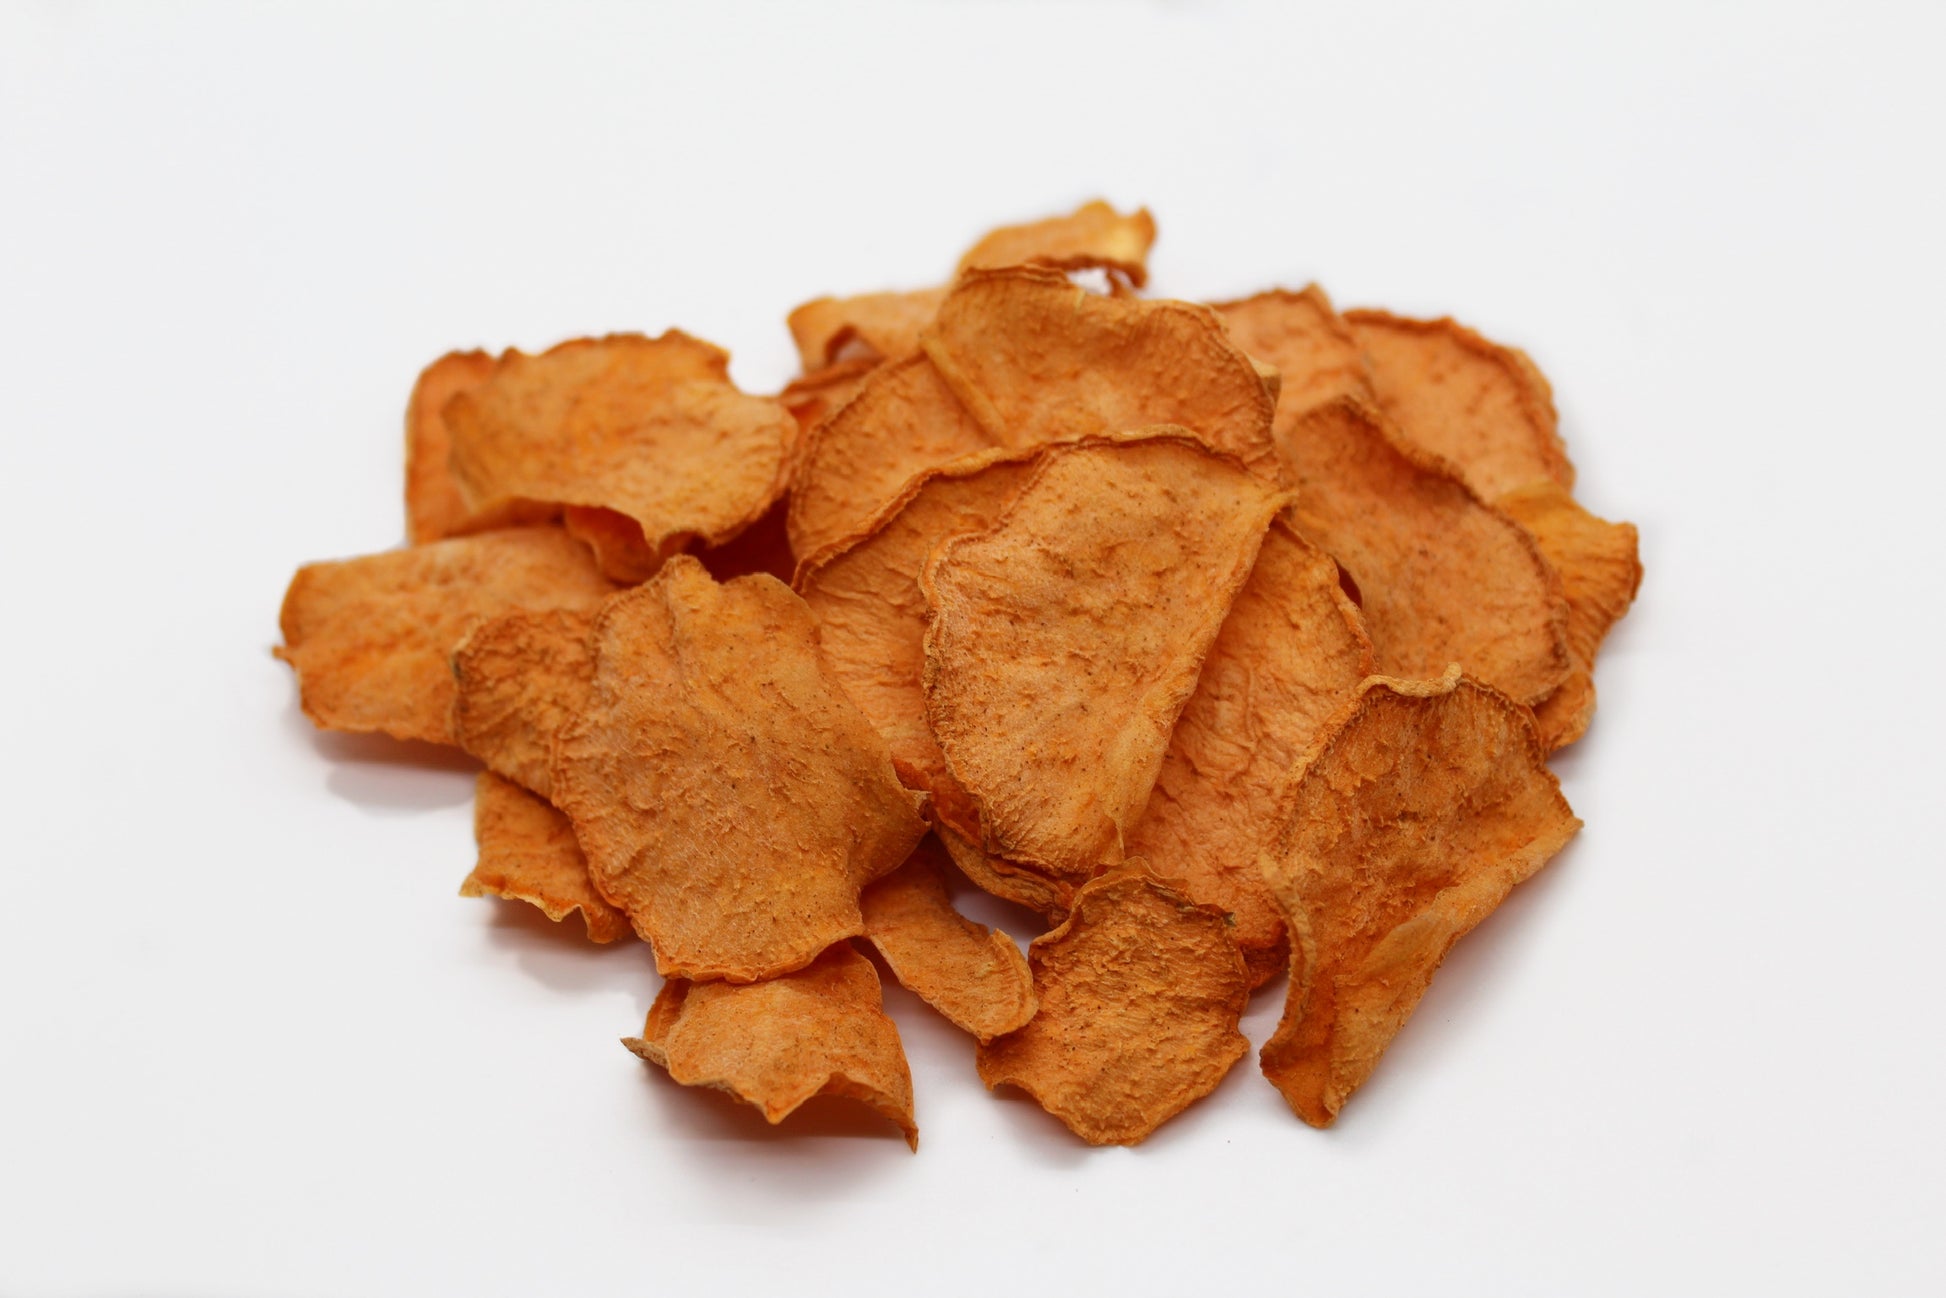 A handful of dehydrated sweet potato chips lightly tossed in cinnamon. The chips are a beautiful bright orange color with flecks of cinnamon.